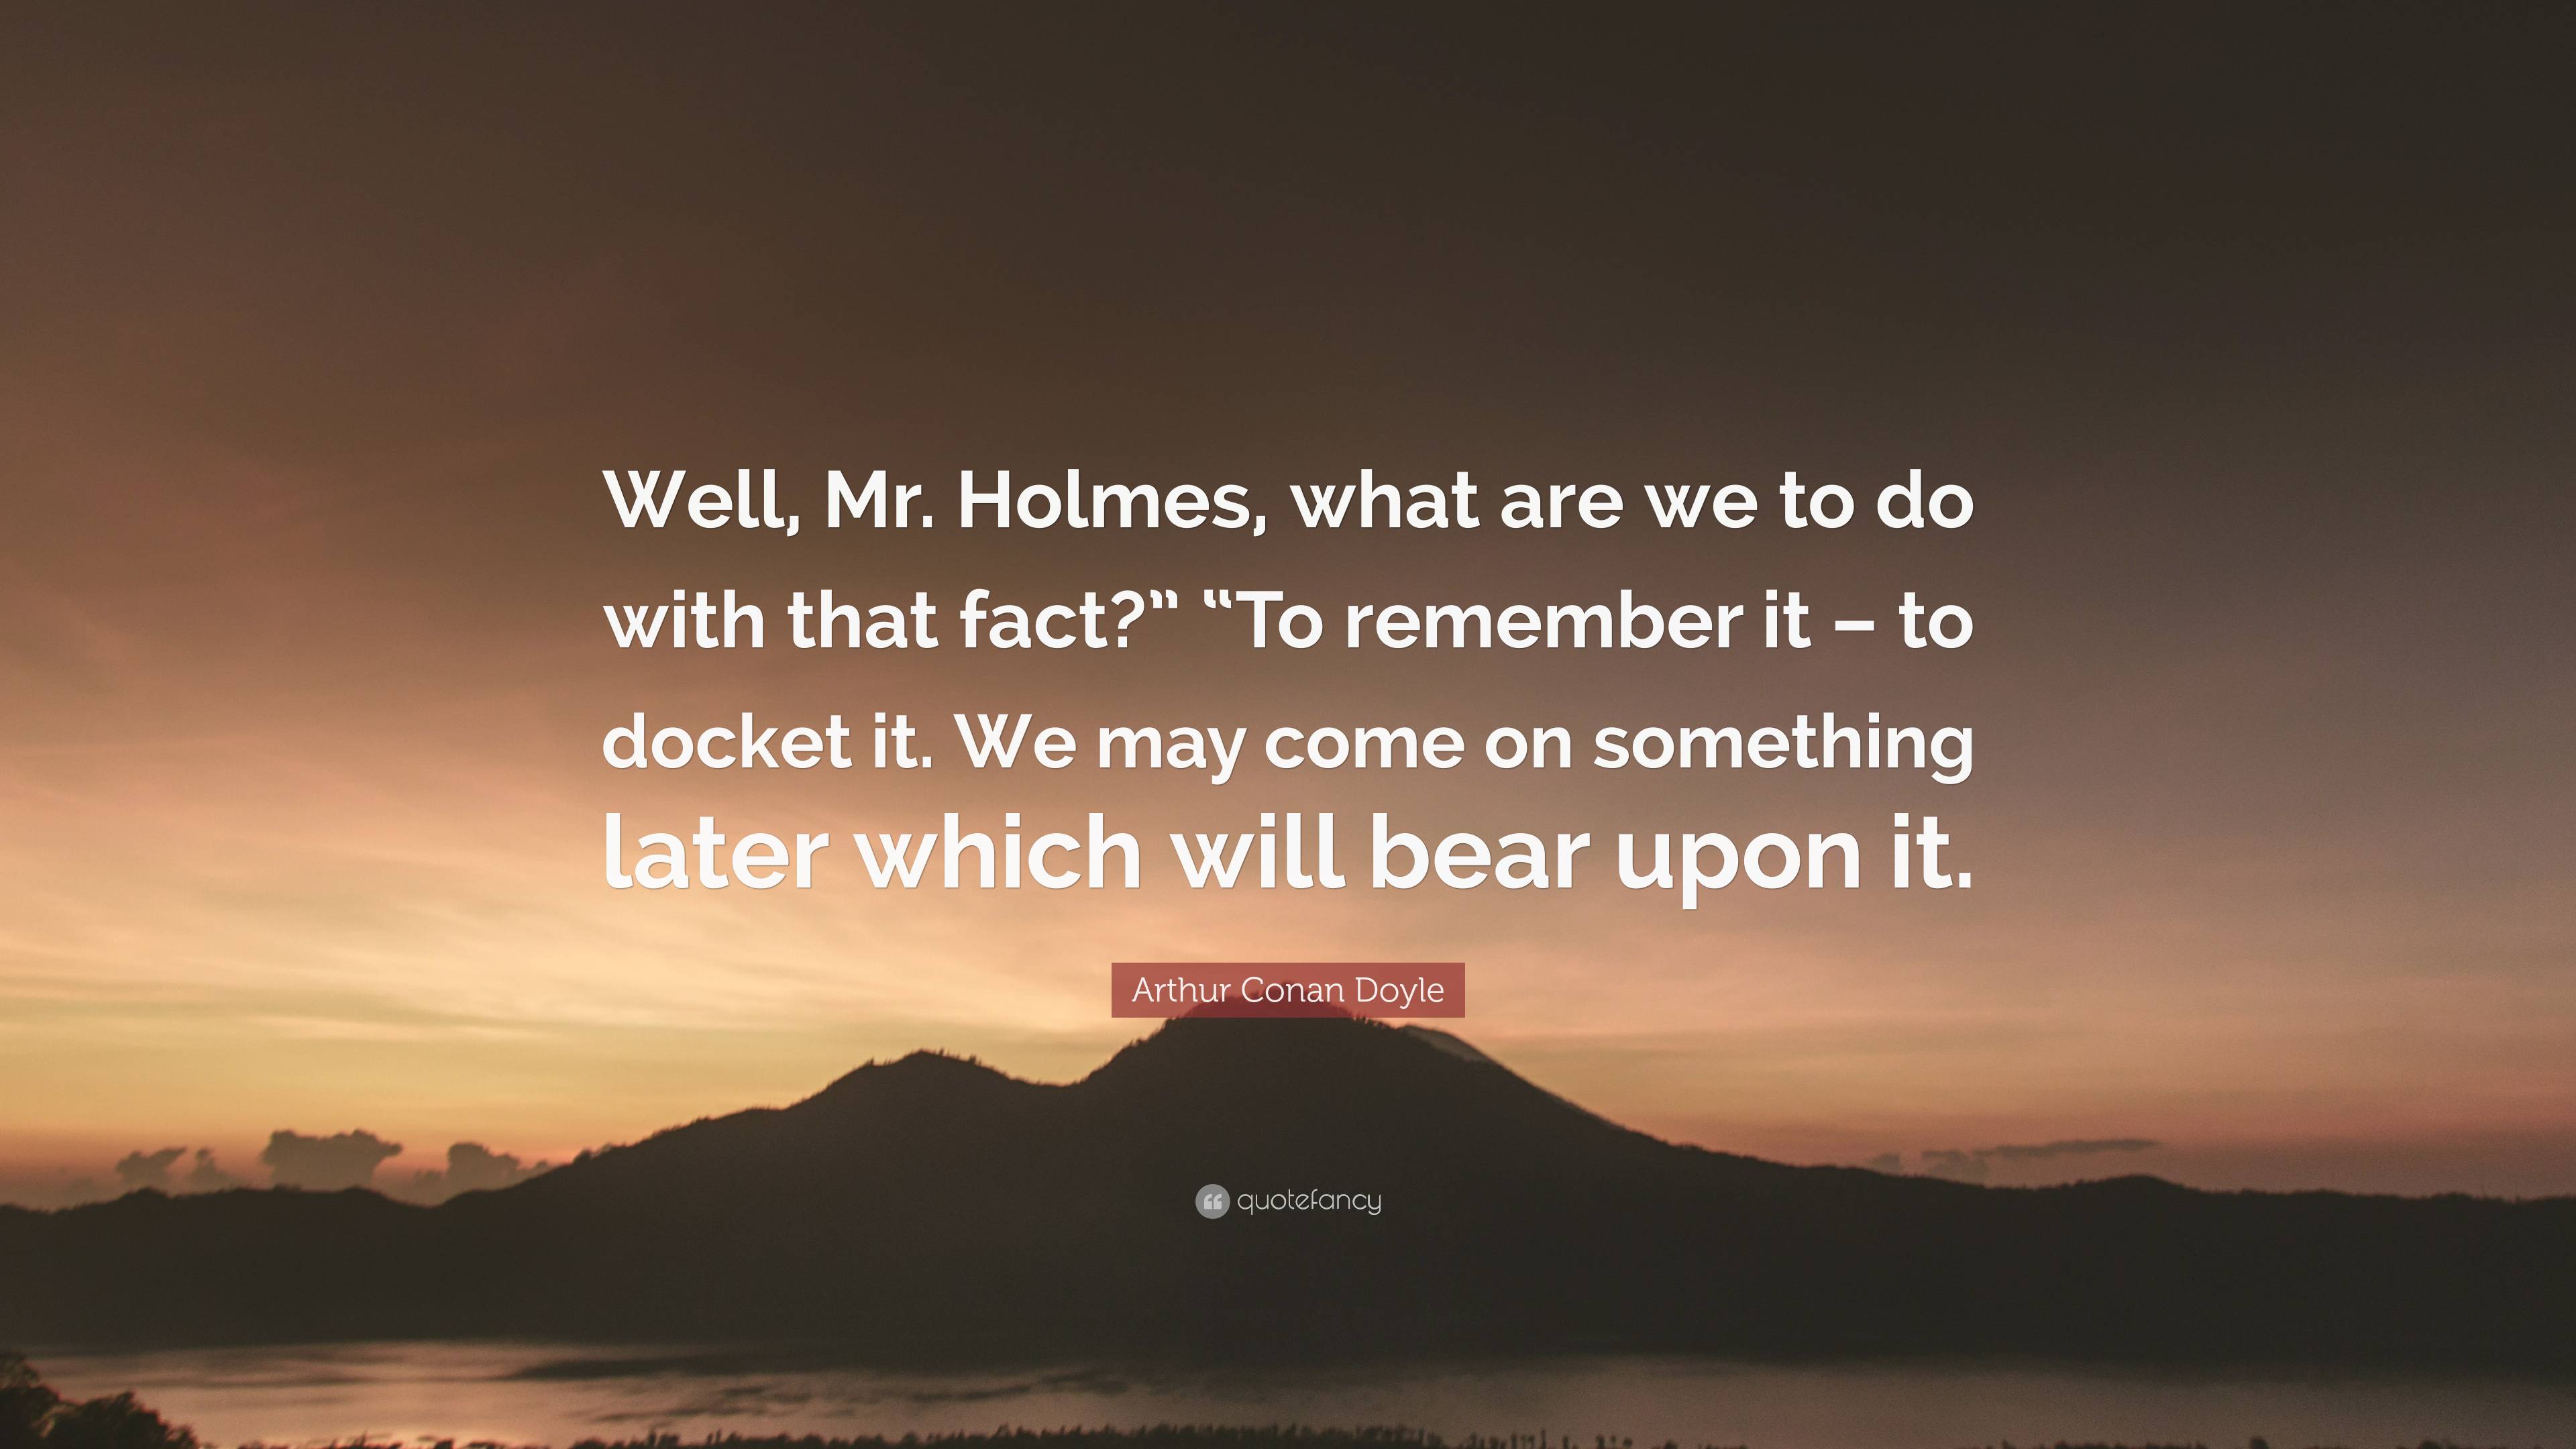 Arthur Conan Doyle Quote Well Mr Holmes What Are We To Do With That Fact To Remember It